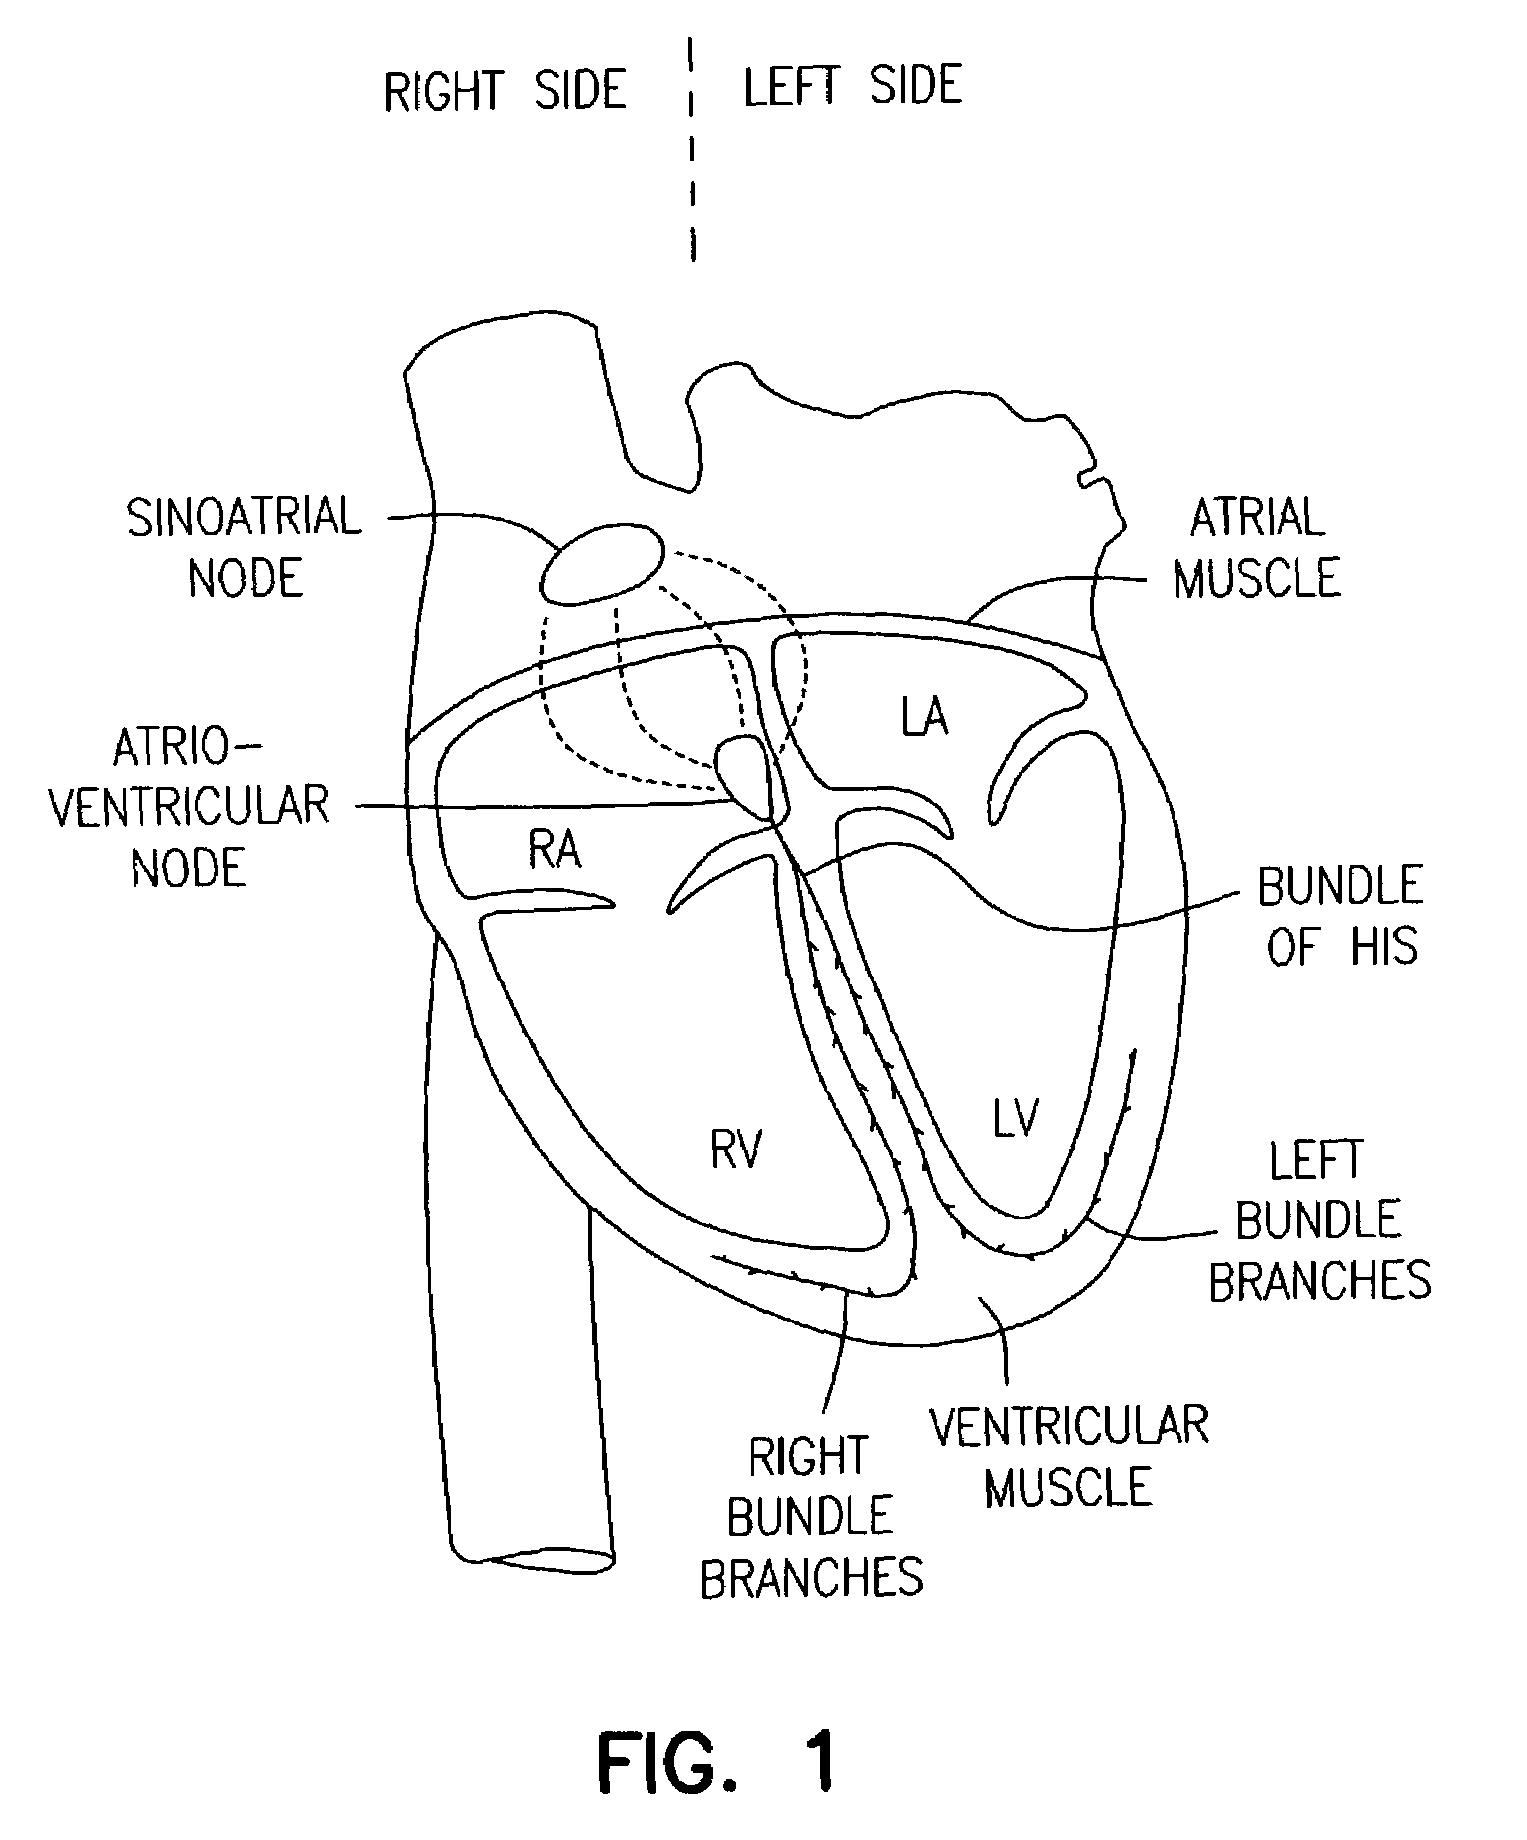 Method and apparatus for optimizing ventricular synchrony during DDD resynchronization therapy using adjustable atrio-ventricular delays